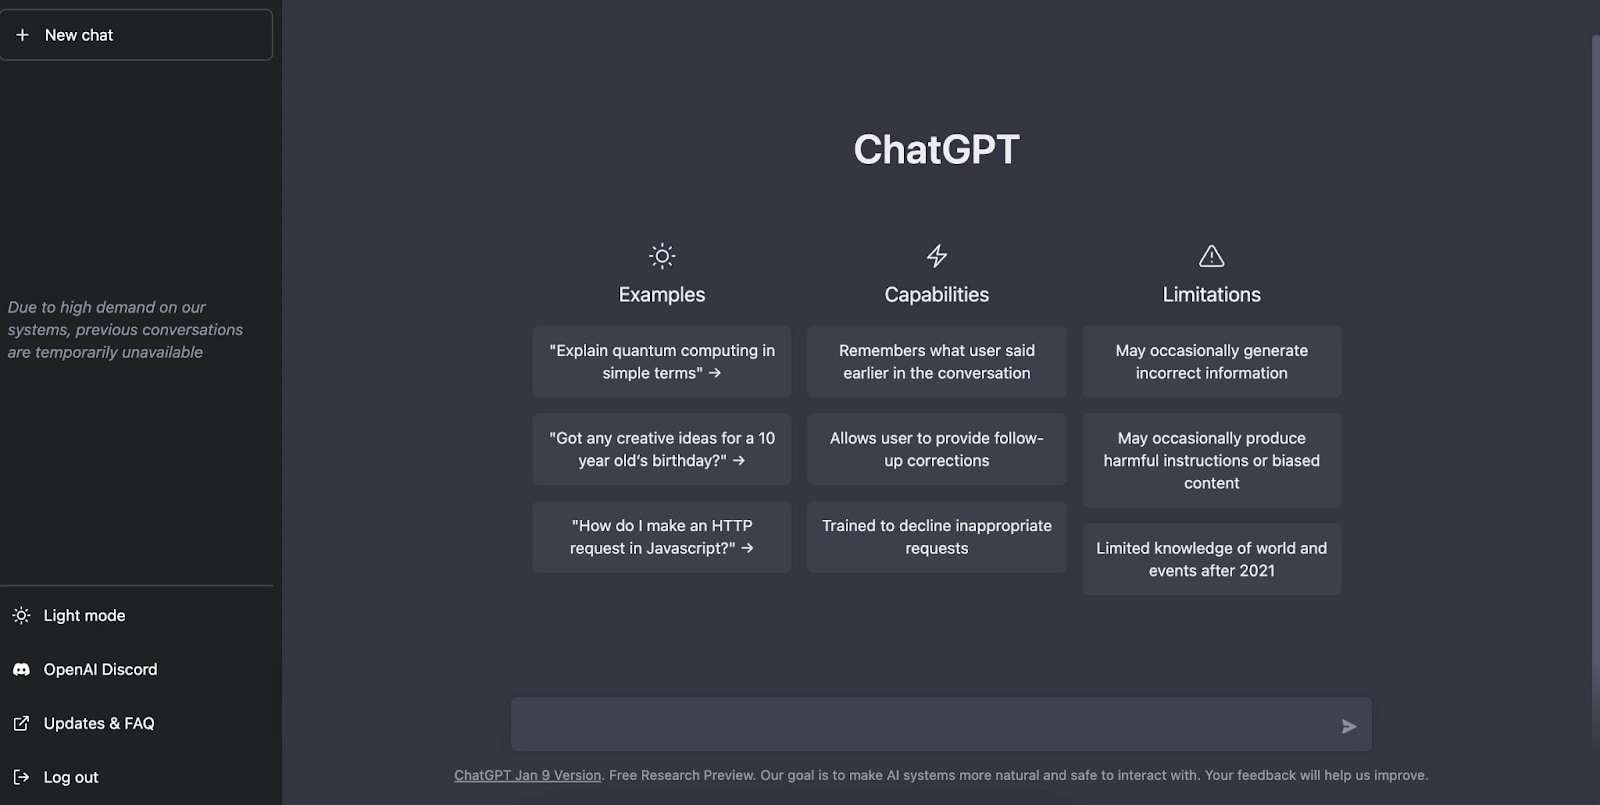 chat gpt screen.jpg?width=1600&height=805&name=chat gpt screen - A Look Back at 30+ Years of Website Design